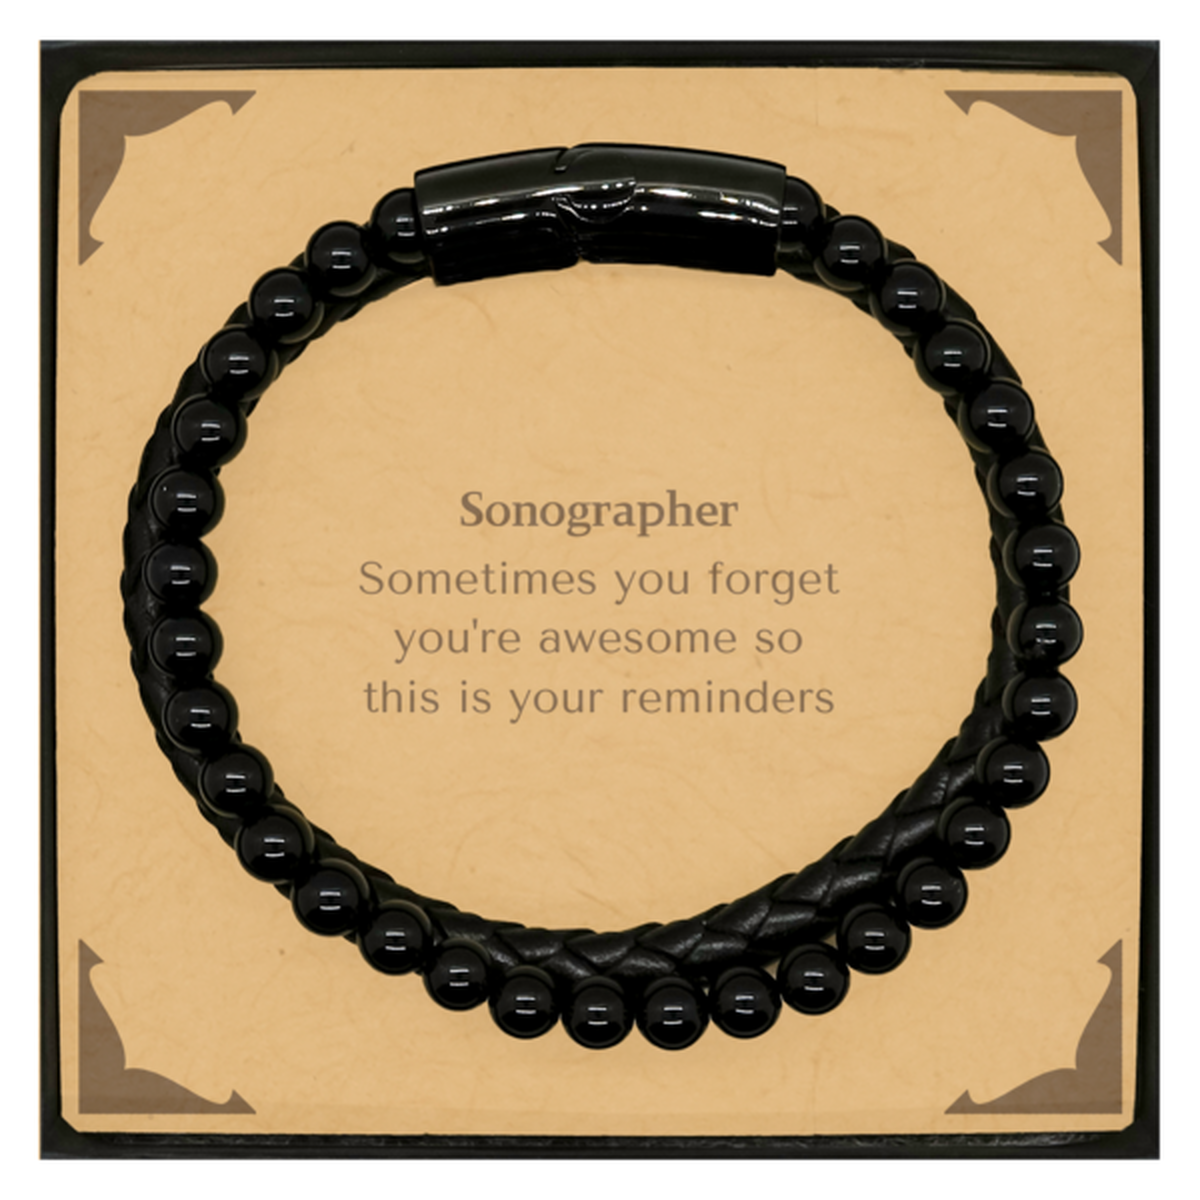 Sentimental Sonographer Stone Leather Bracelets, Sonographer Sometimes you forget you're awesome so this is your reminders, Graduation Christmas Birthday Gifts for Sonographer, Men, Women, Coworkers